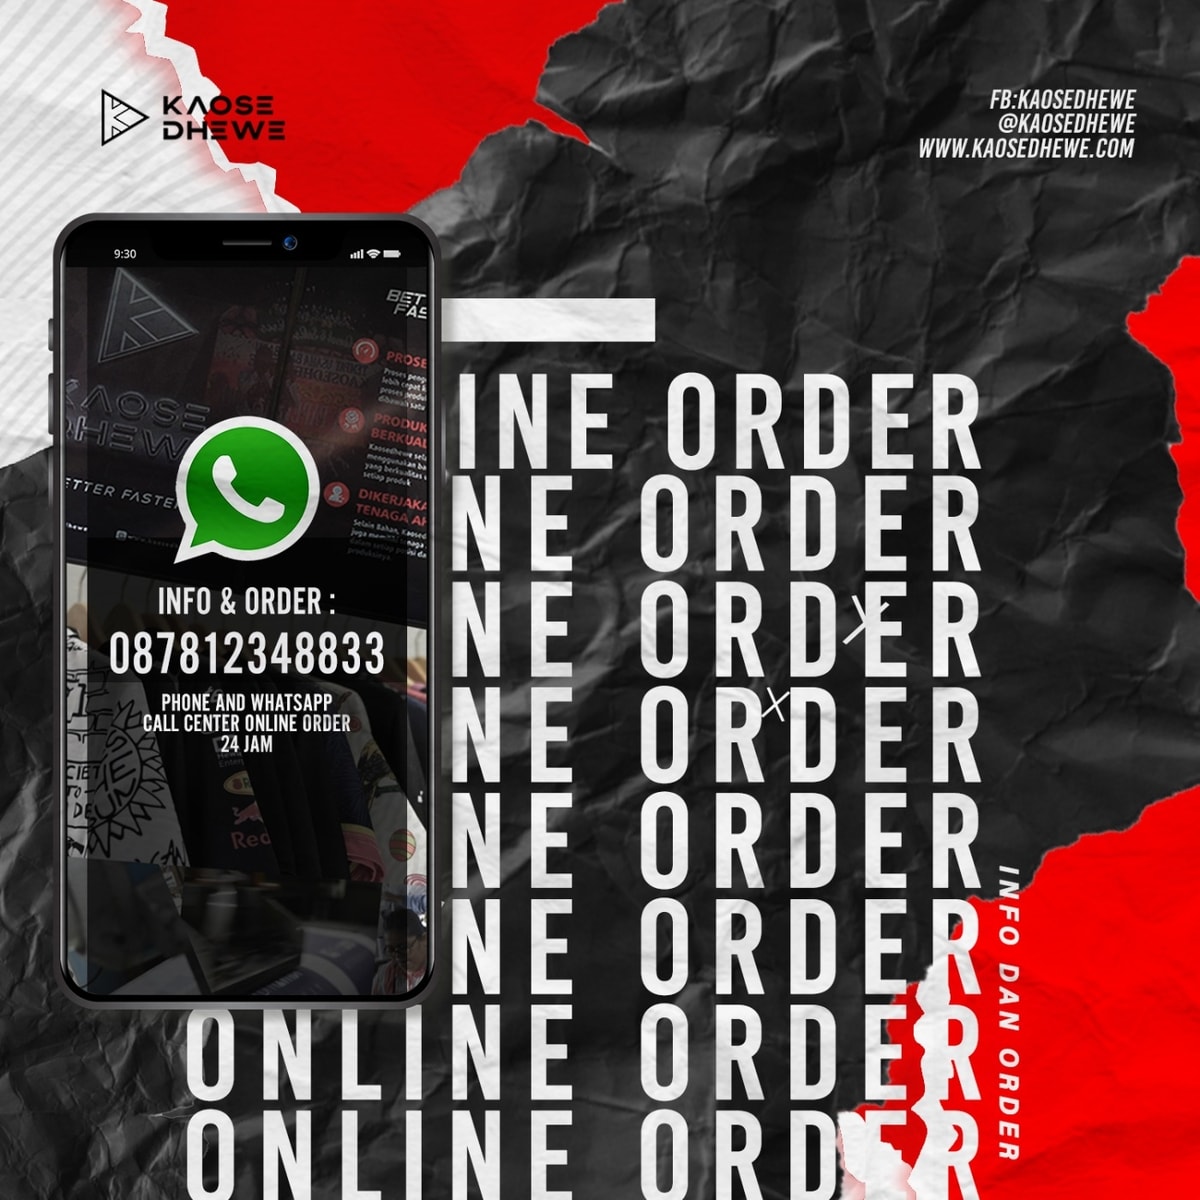 ONLINE ORDER CALL INFO AND ORDER